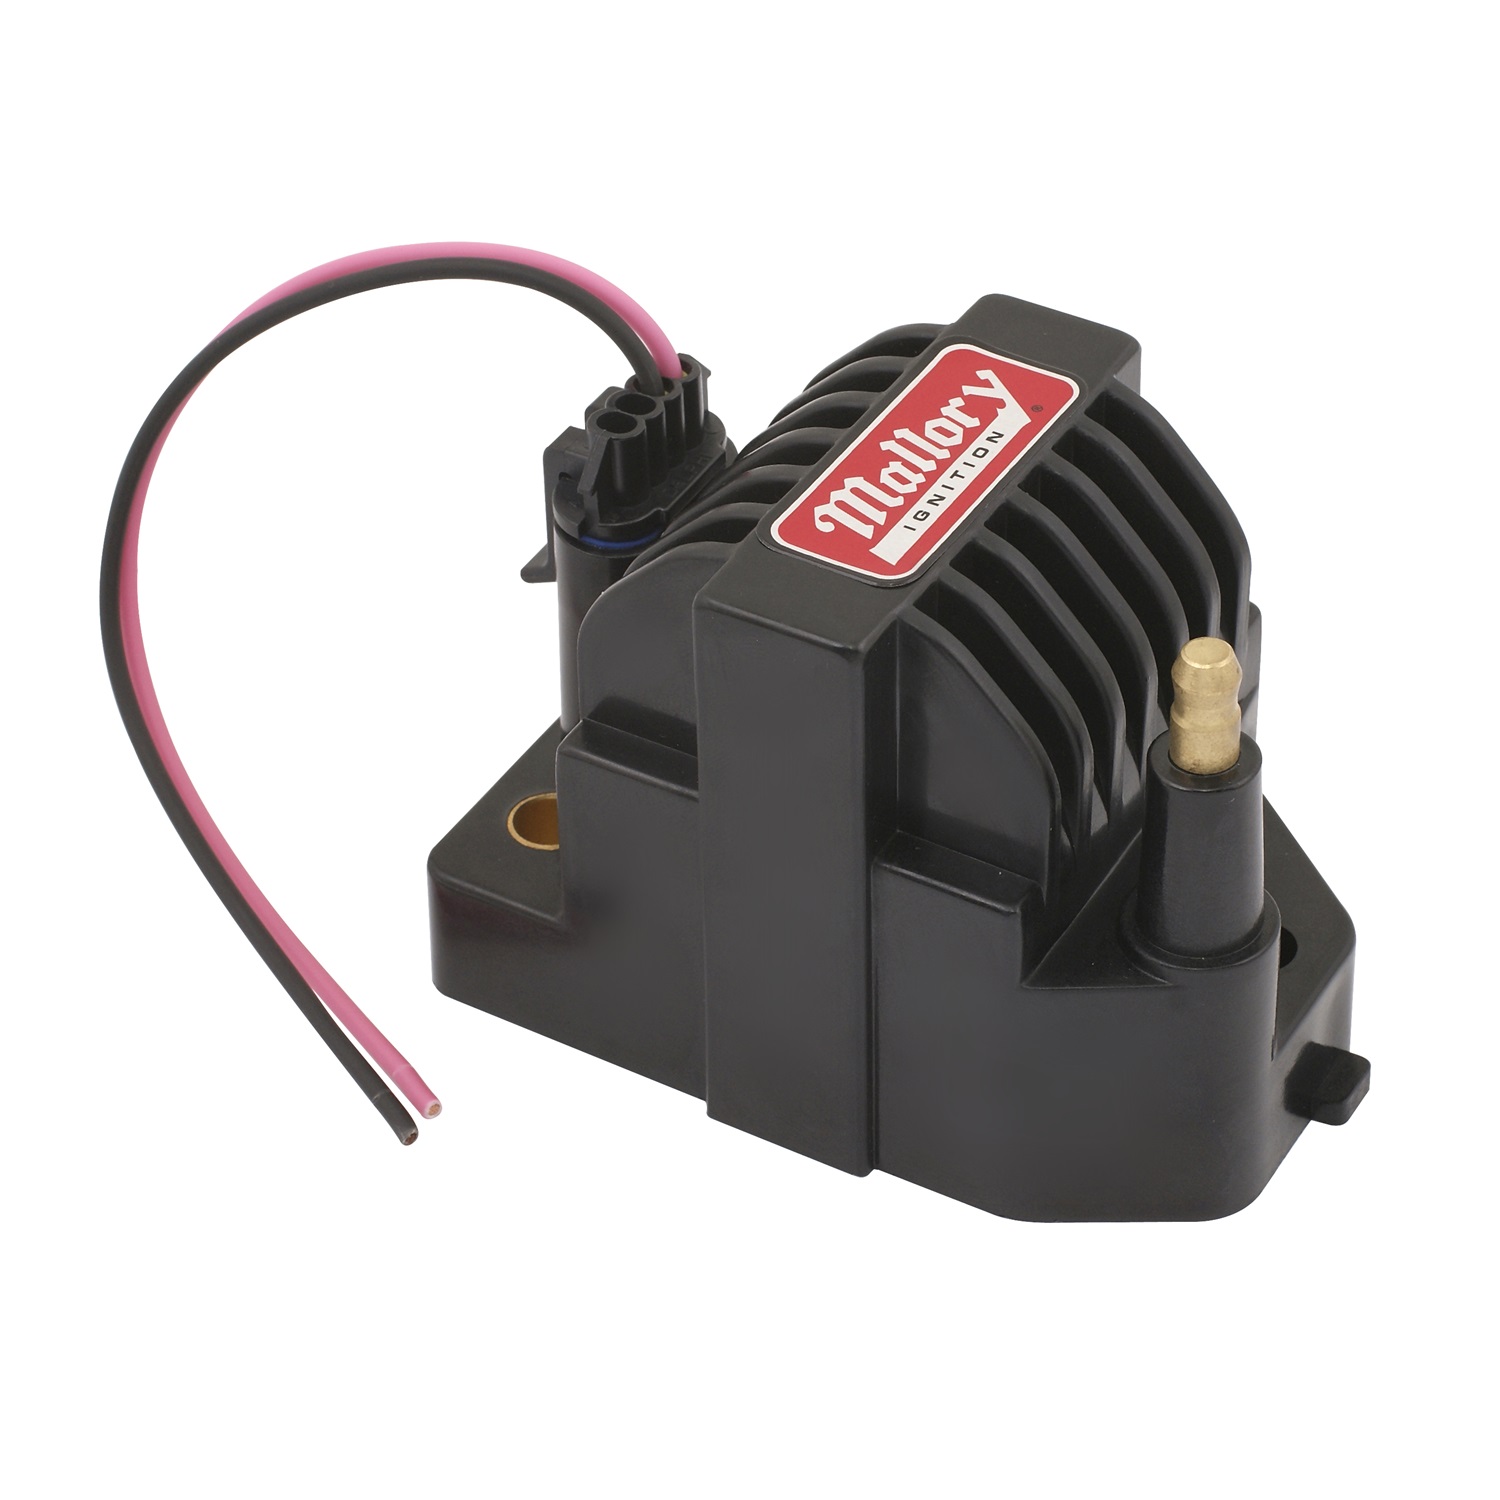 Mallory Mallory 140051-8 Firestorm Ignition Coil